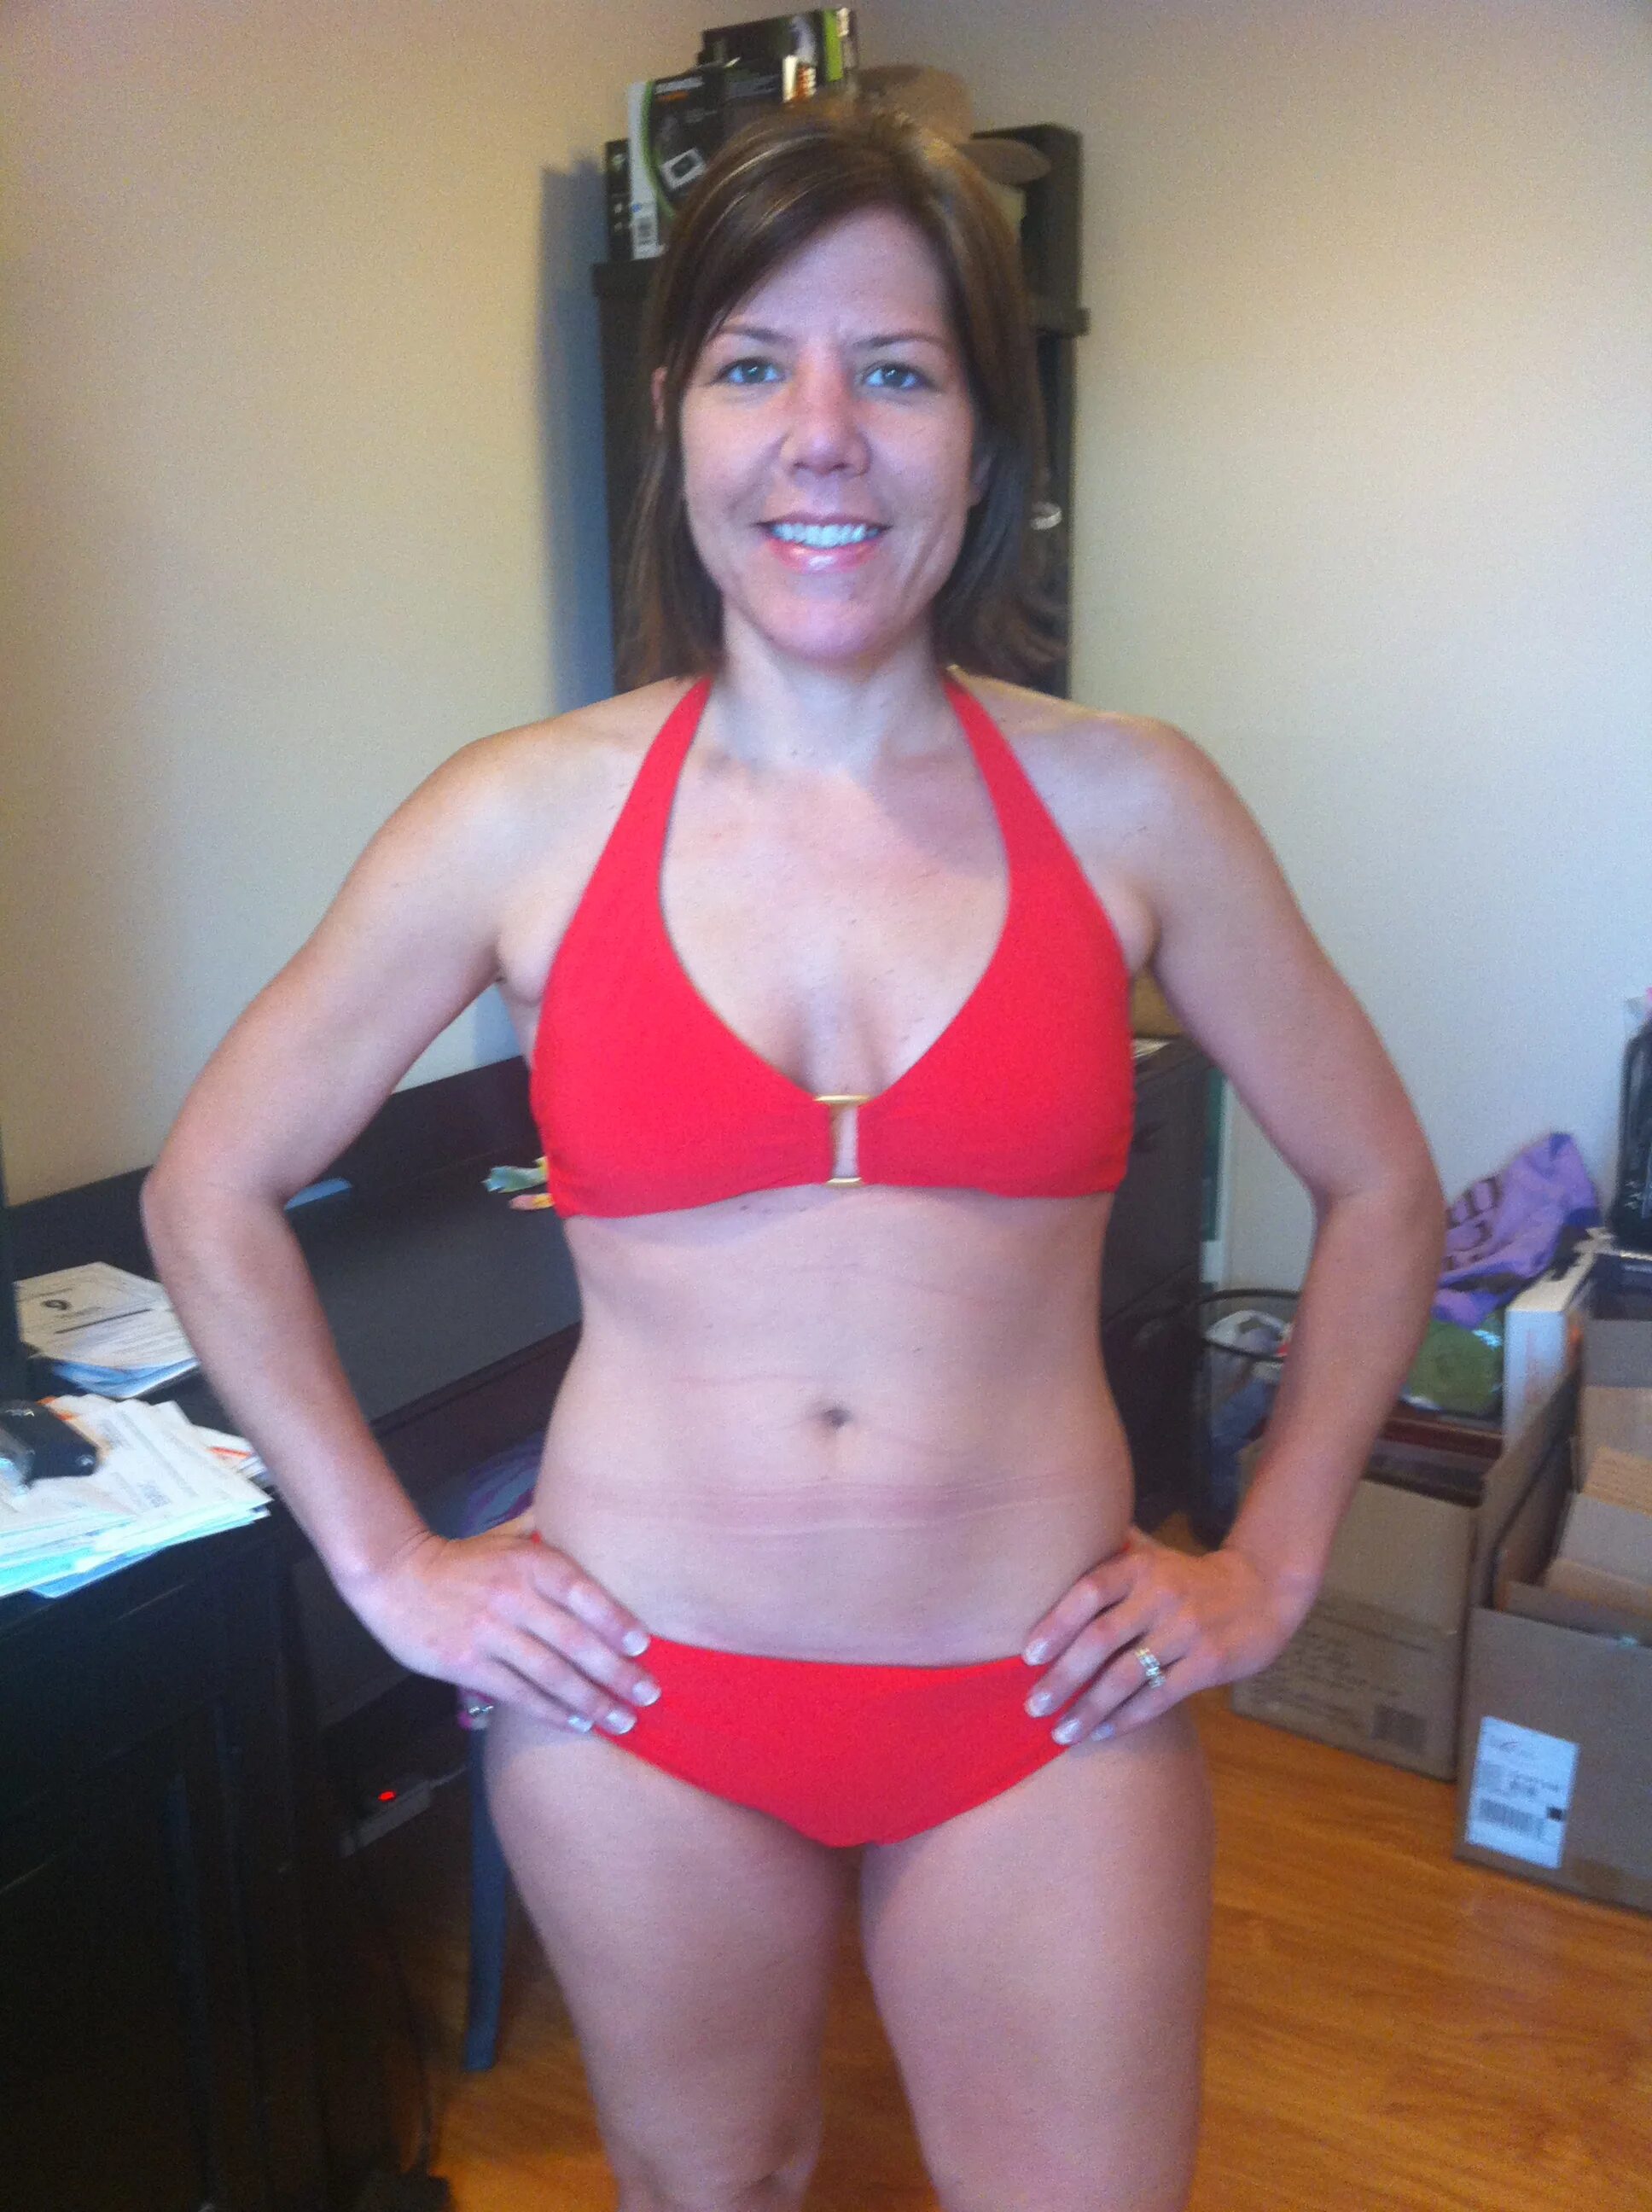 Middle-aged in Swimsuit. Sunnymoms фото. Amateur shows